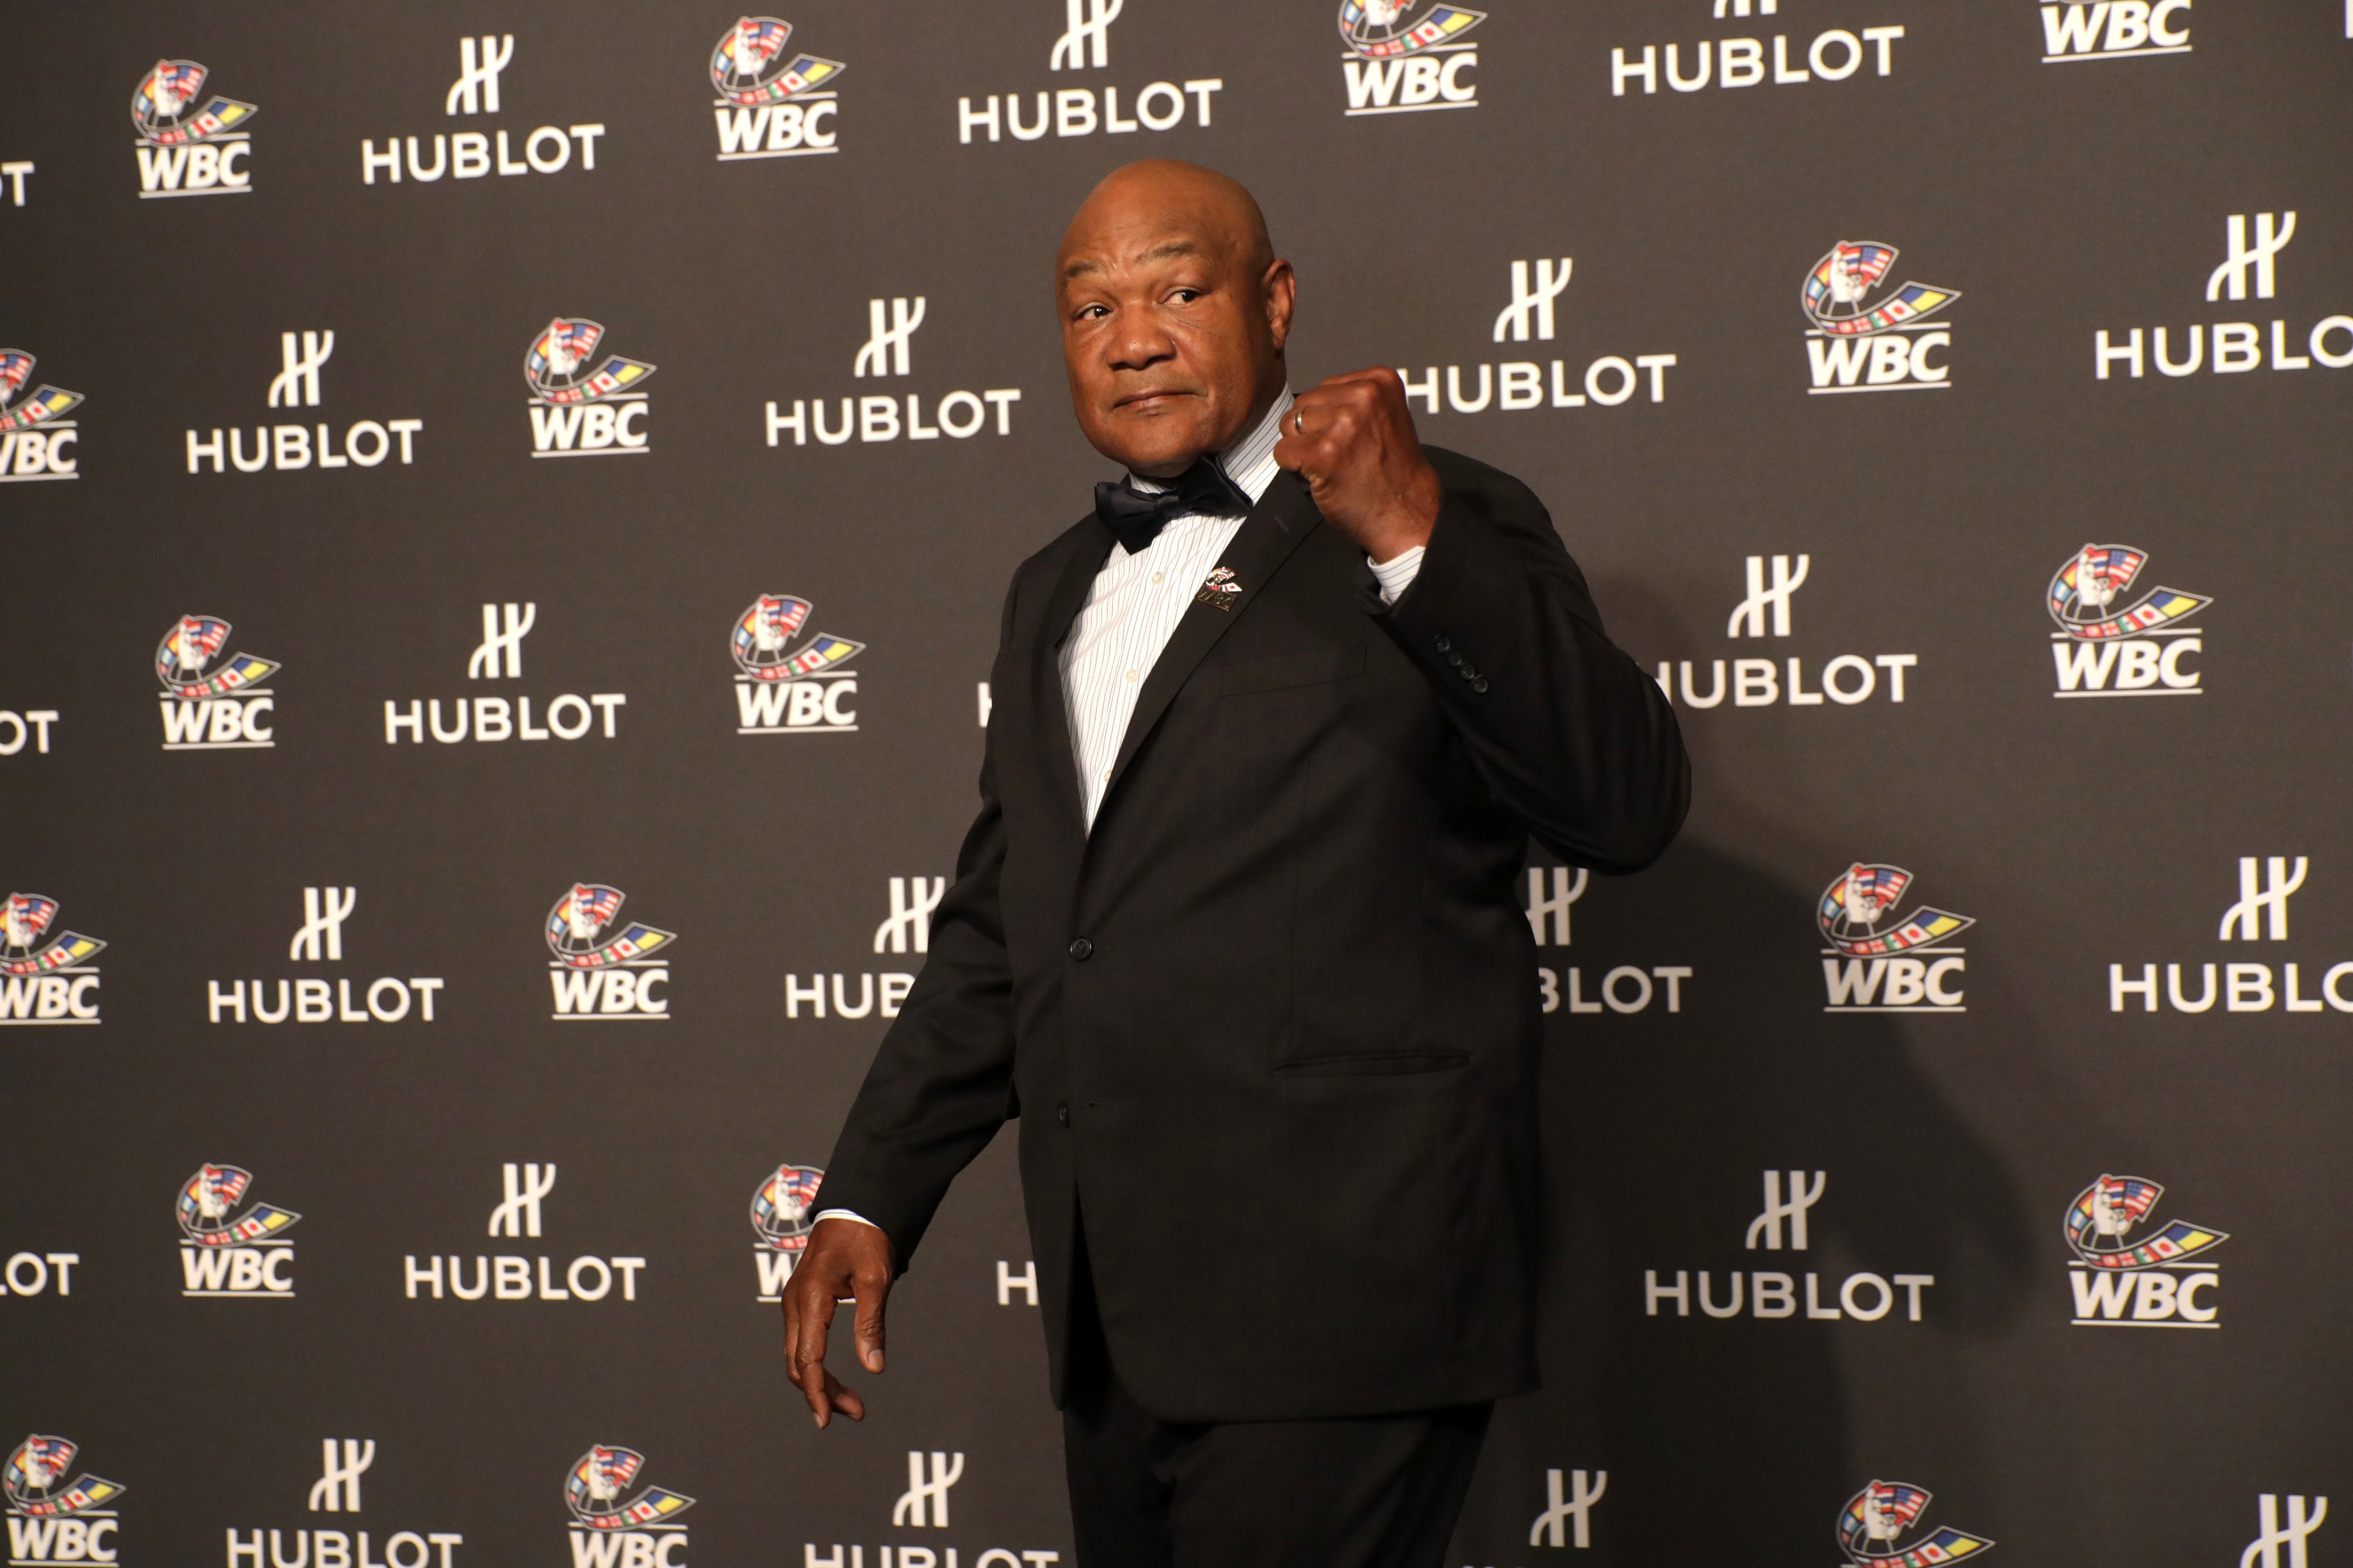 LAS VEGAS, NEVADA - MAY 03:  George Foreman attends the Hublot x WBC "Night of Champions" Gala at the Encore Hotel on May 03, 2019 in Las Vegas, Nevada. (Photo by Roger Kisby/Getty Images for Hublot) (Foto: Getty Images for Hublot)